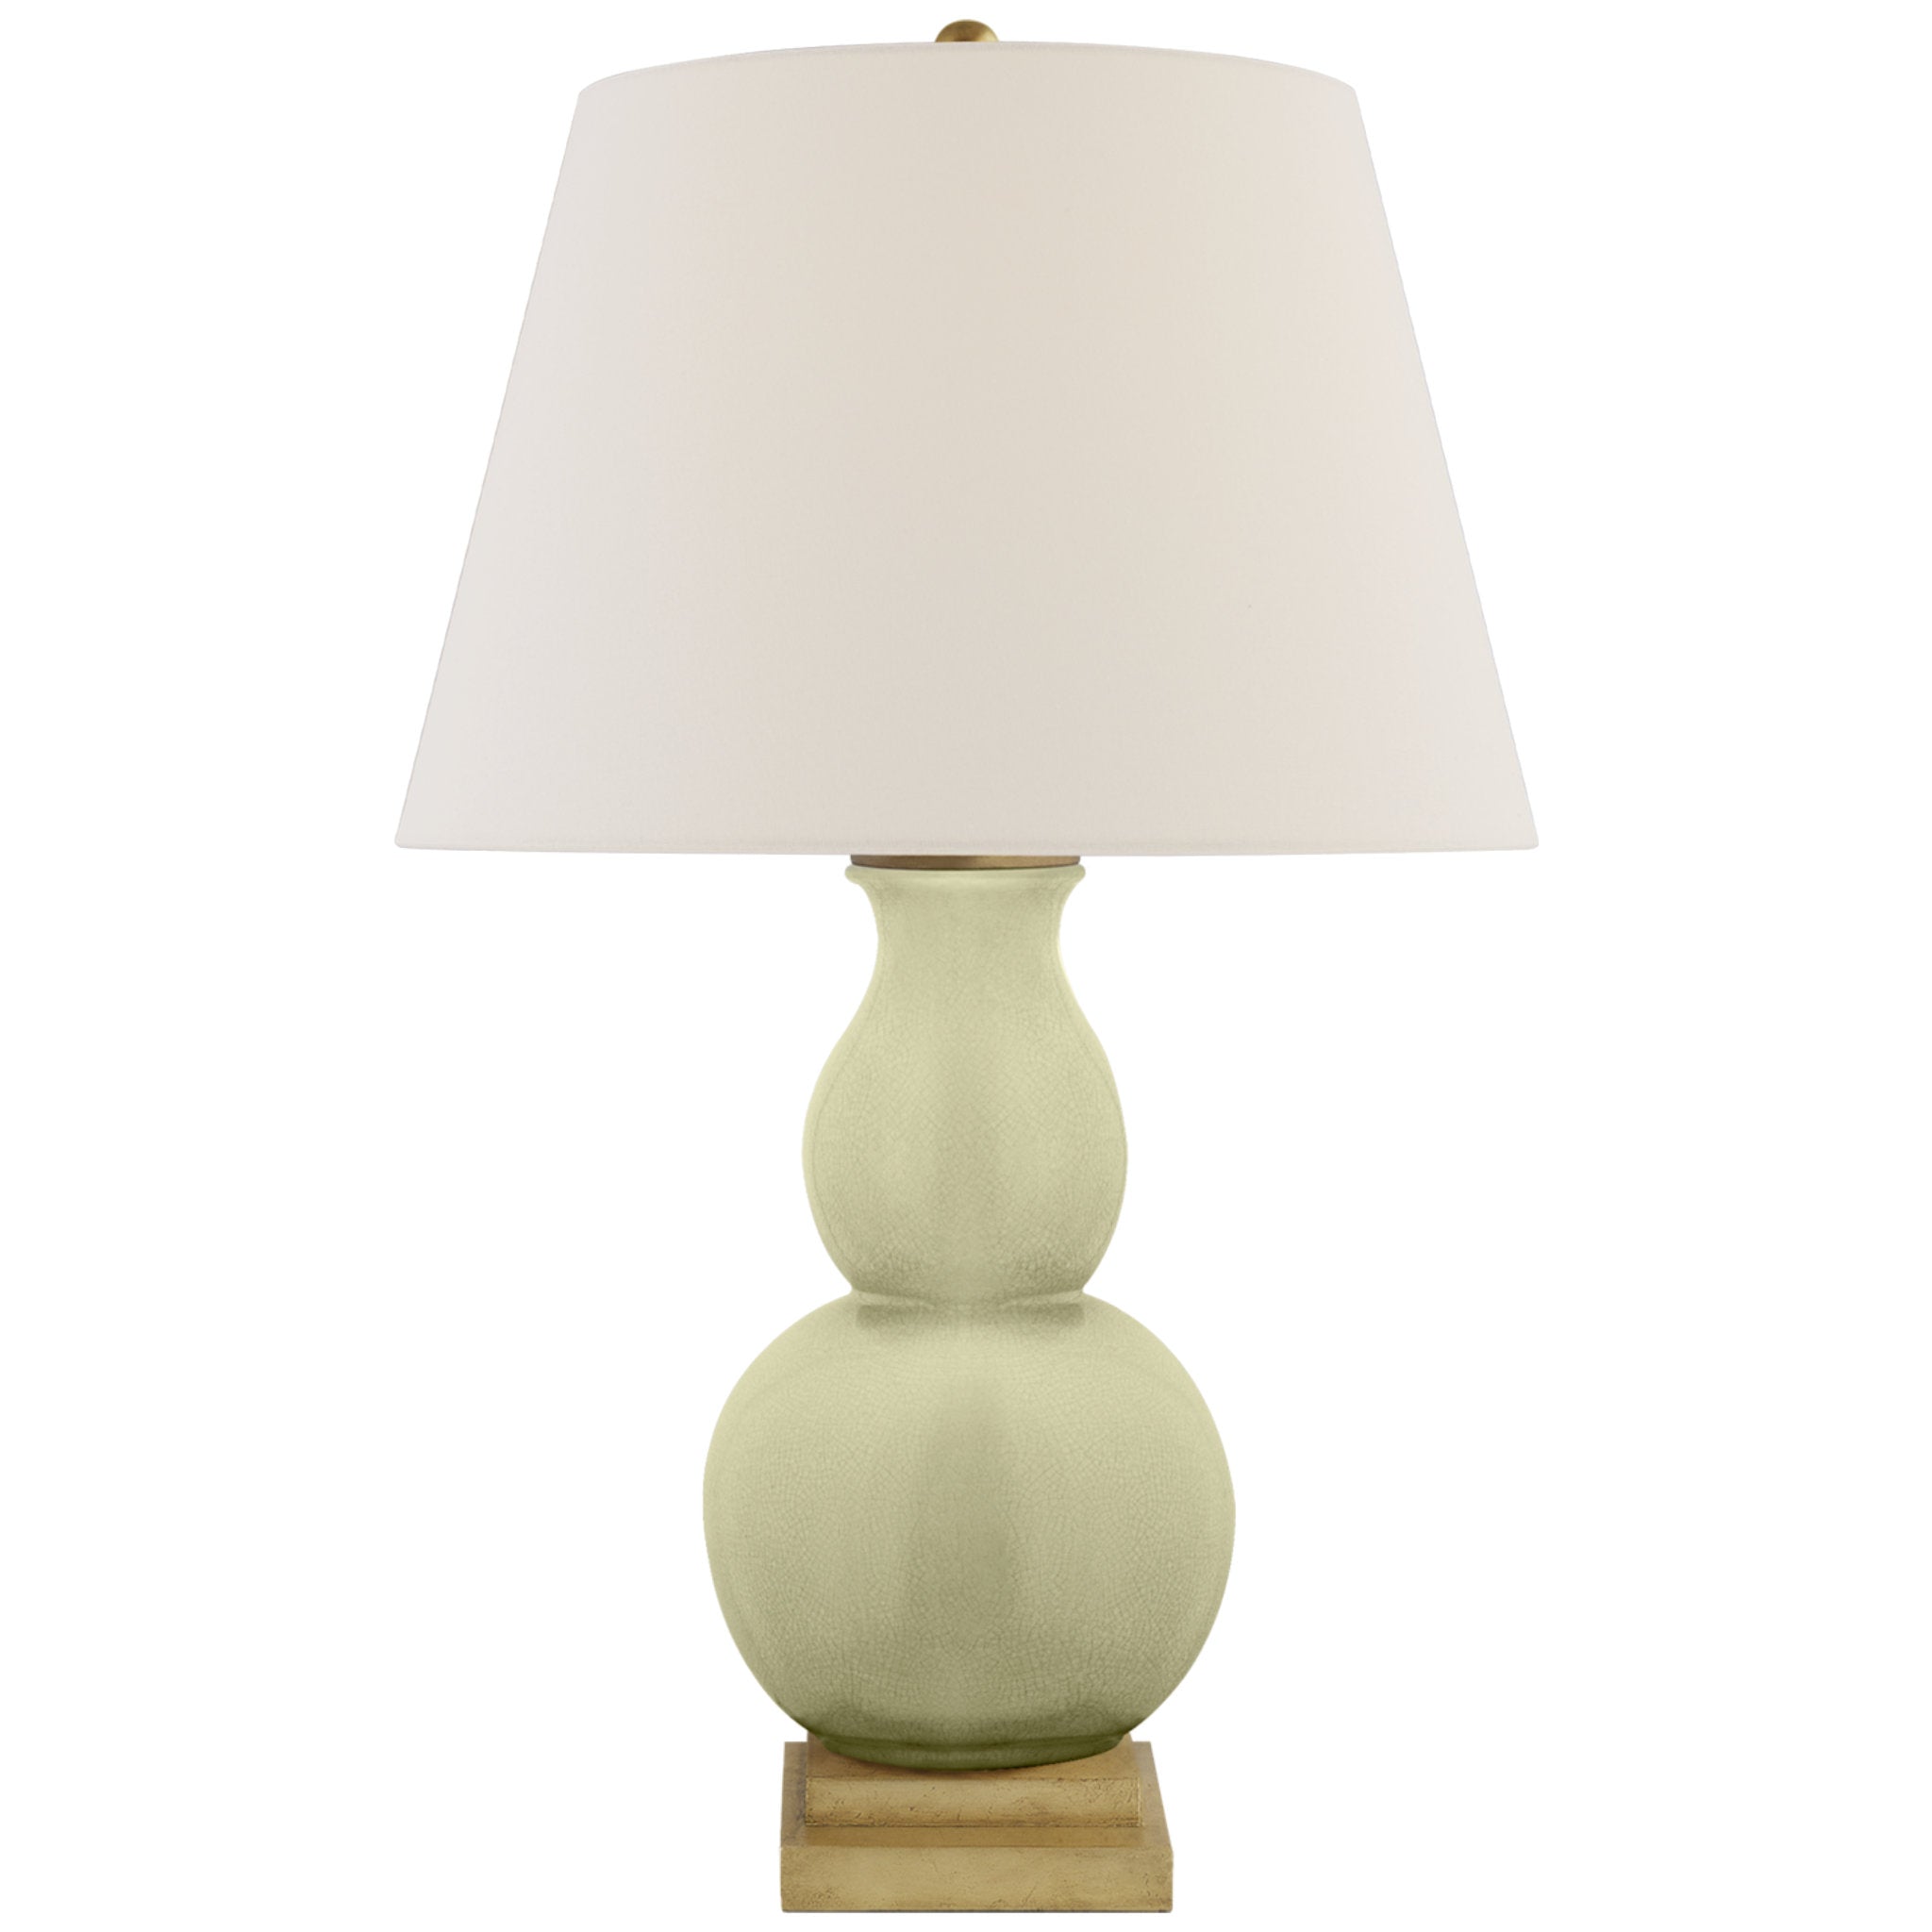 Chapman & Myers Gourd Form Small Table Lamp in Celadon Crackle with Linen Shade